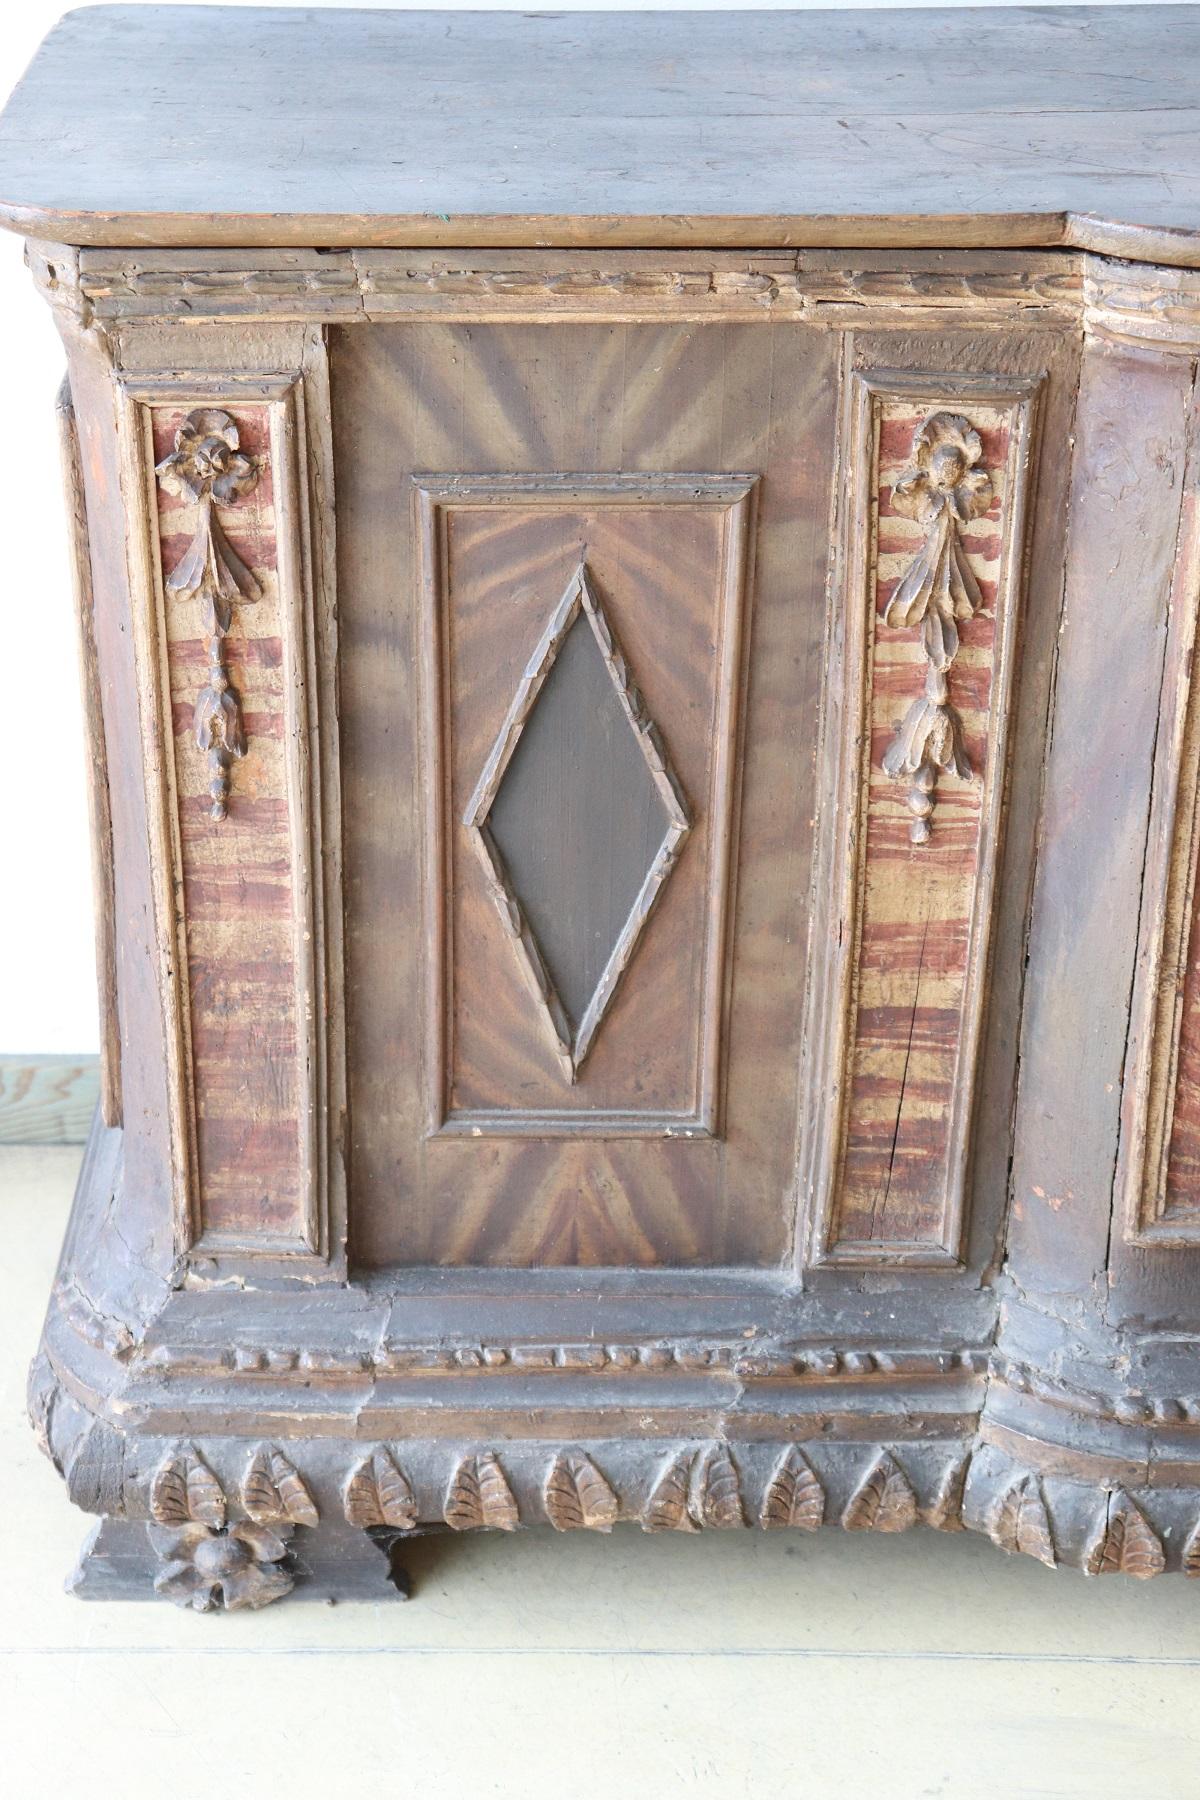 Rare collector's item ! Antique church altar from the late 16th century painted wood. On the front and sides written in Latin. Over the centuries it has undergone some changes. This piece of furniture is perfect for a historical museum or a church